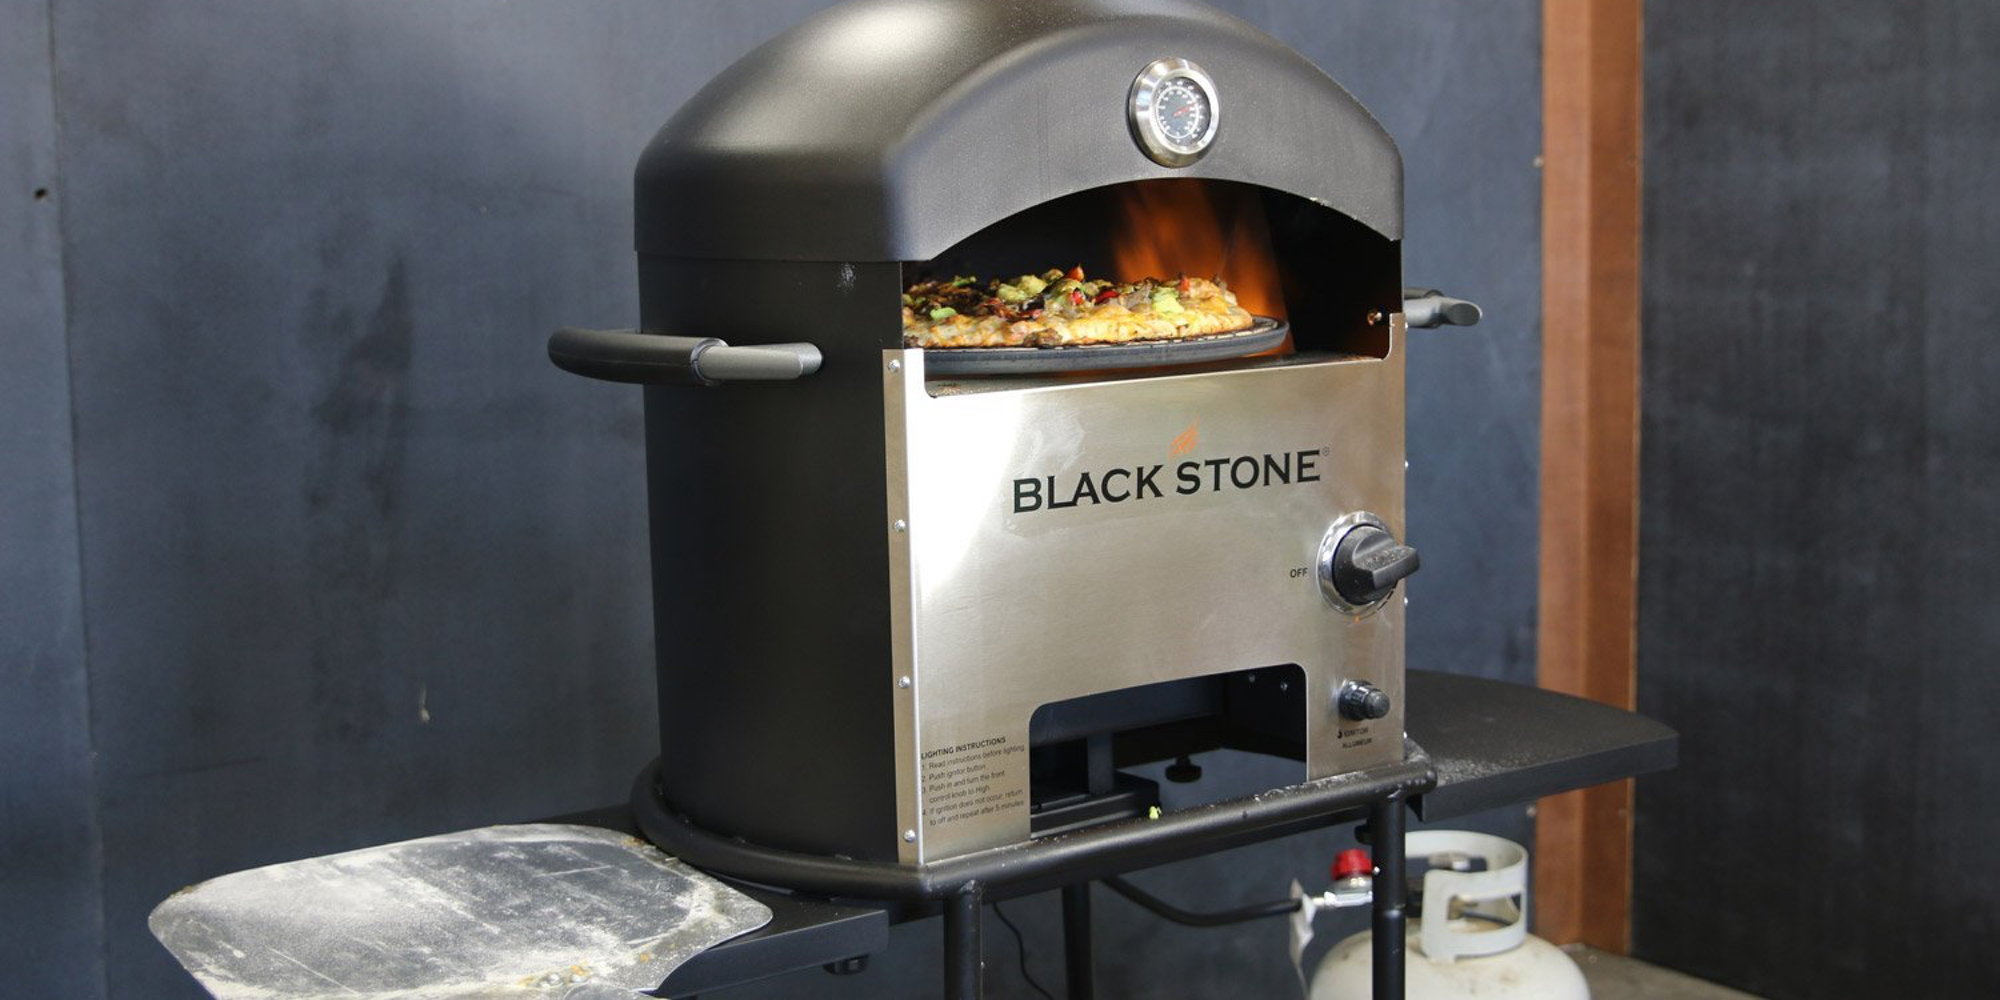 Blackstones Outdoor Pizza Oven Is On Sale For 191 Reg 248